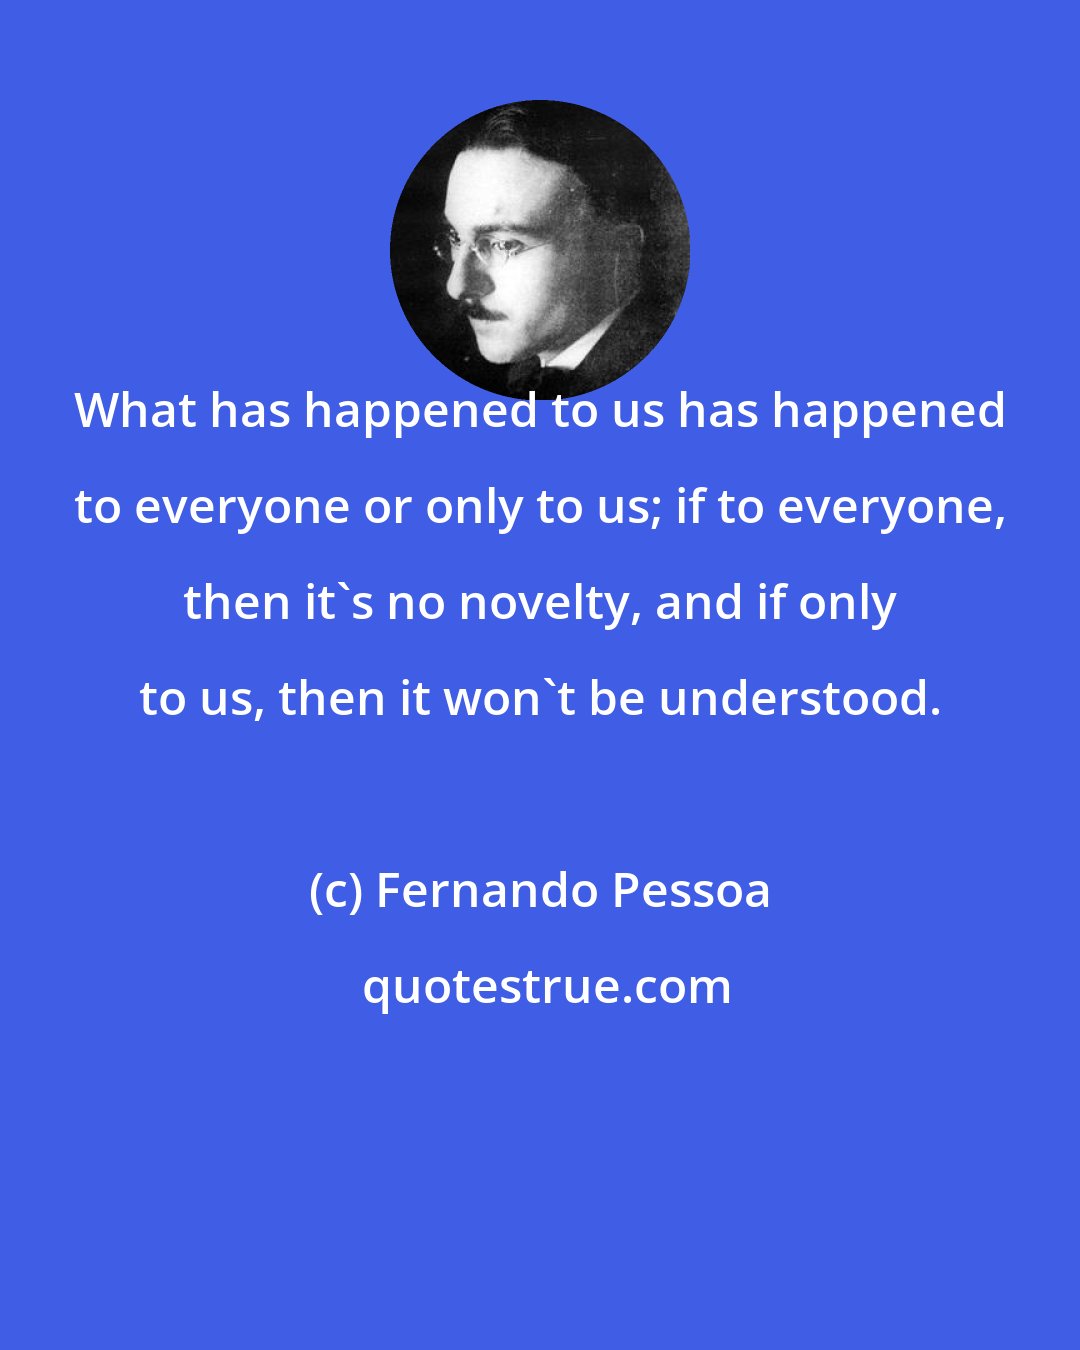 Fernando Pessoa: What has happened to us has happened to everyone or only to us; if to everyone, then it's no novelty, and if only to us, then it won't be understood.